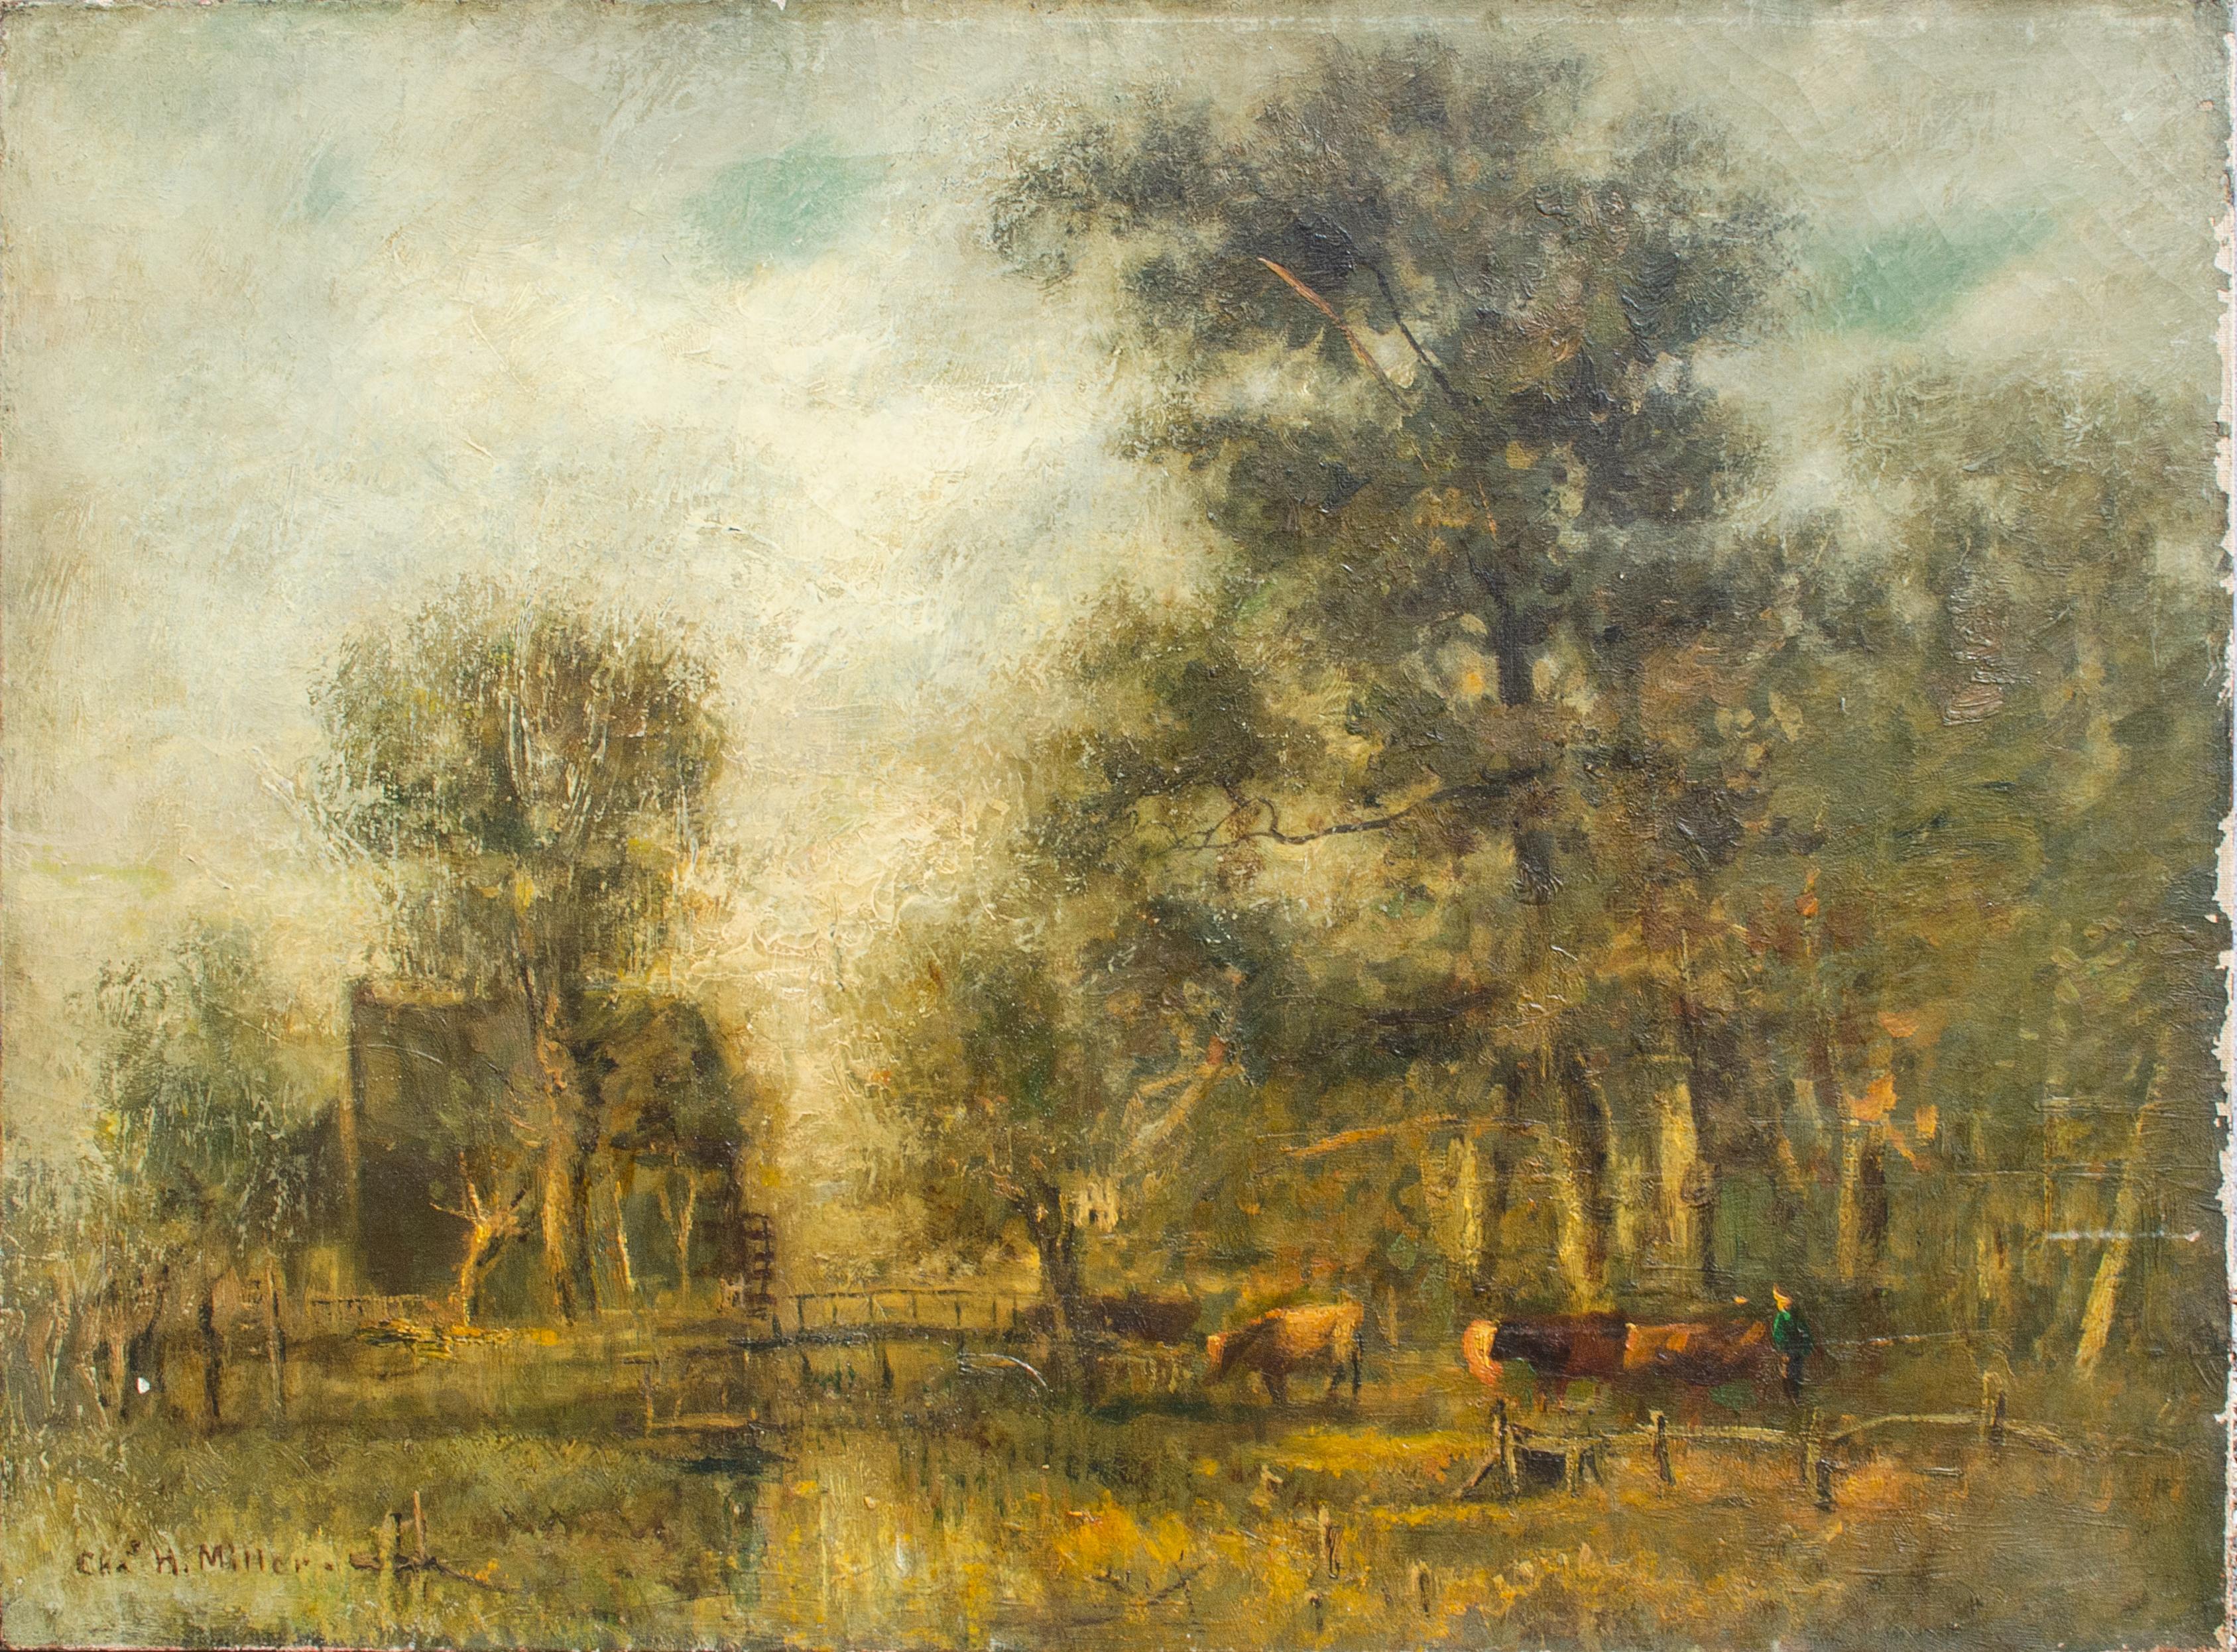 Charles Henry Miller Landscape Painting - Impressionist Painting of Cows and Trees by C.H. Miller, Long Island